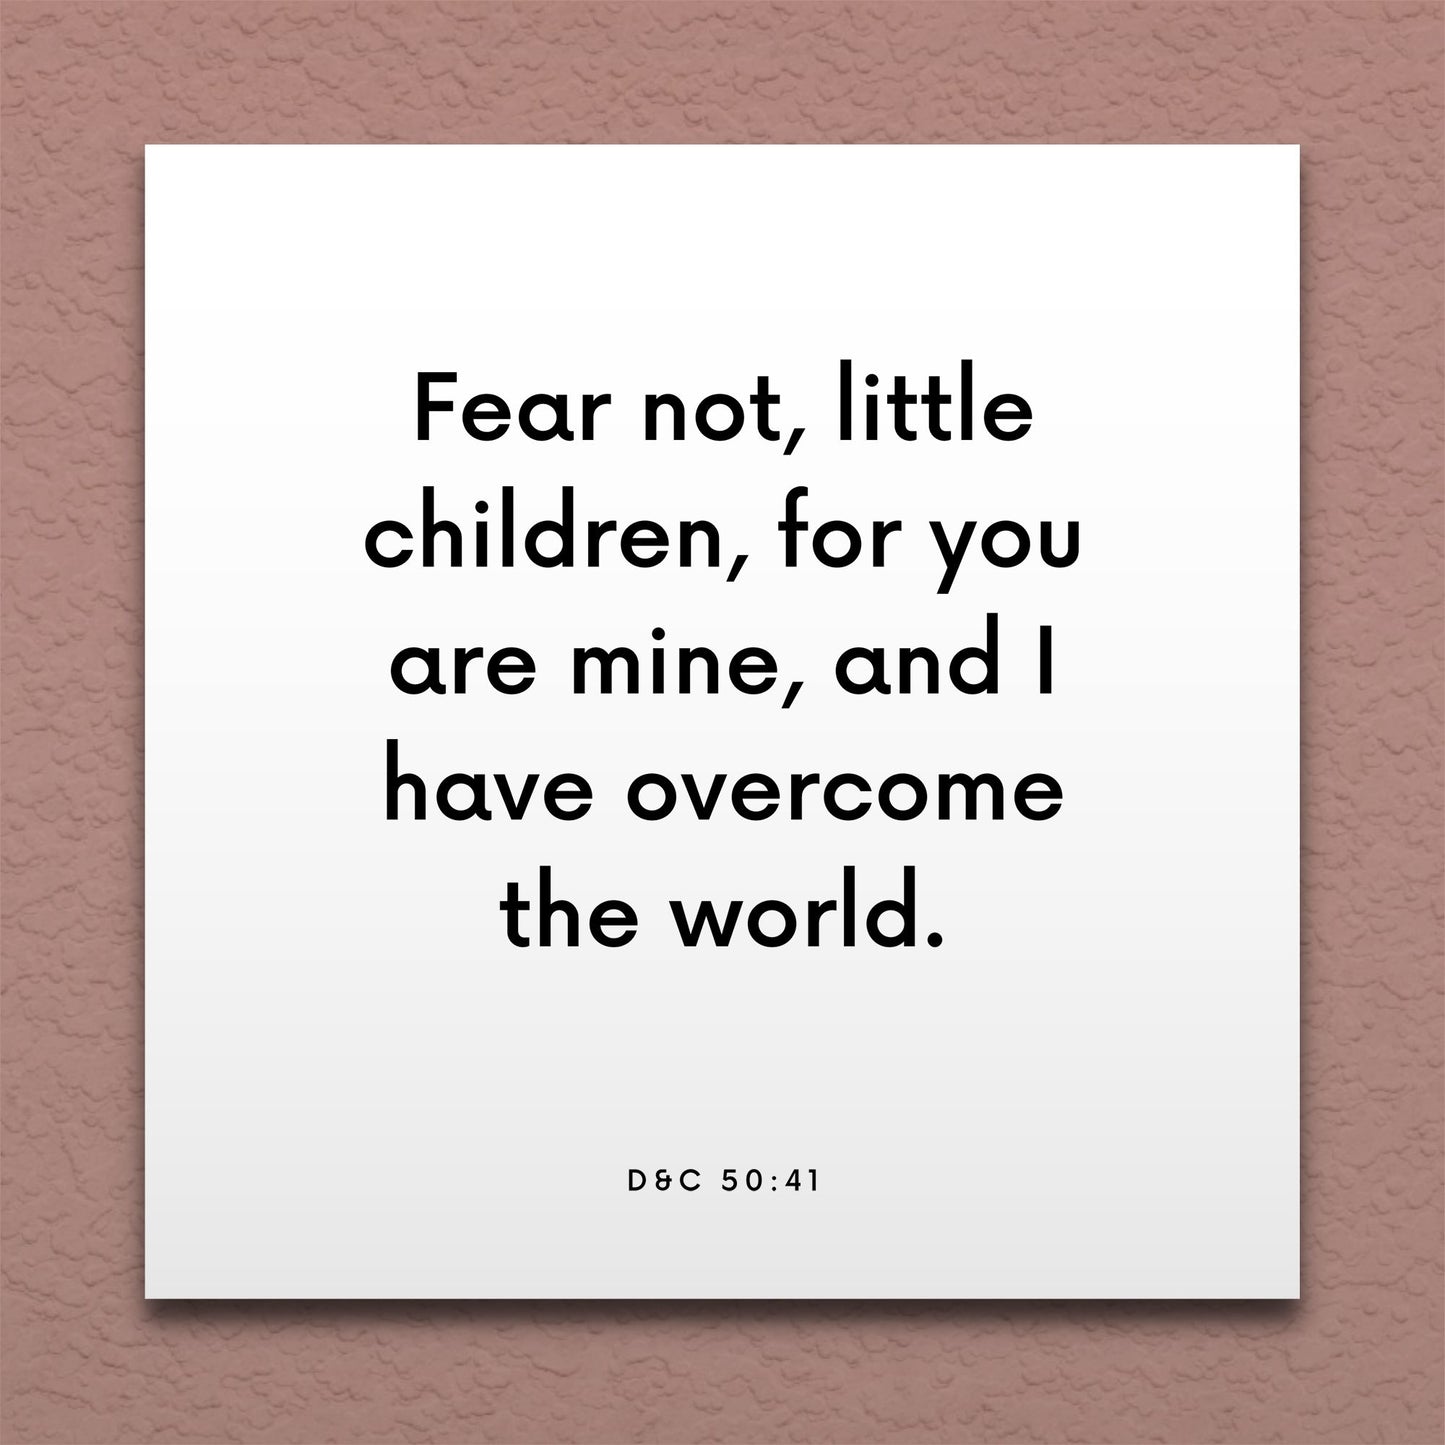 Wall-mounted scripture tile for D&C 50:41 - "Fear not, little children, for you are mine"